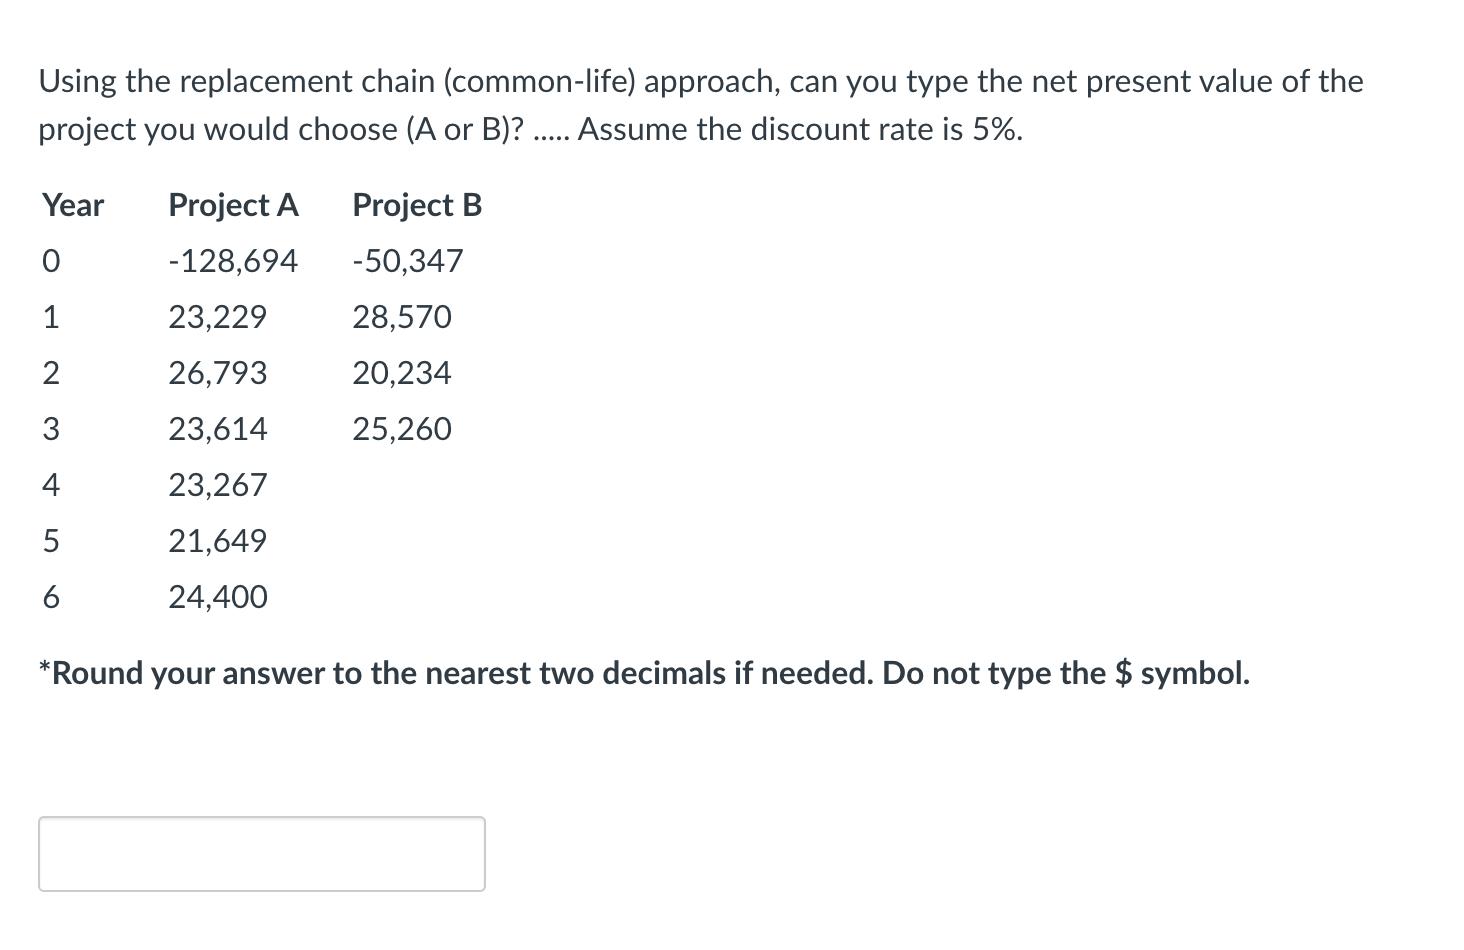 Using the replacement chain (common-life) approach, can you type the net present value of the project you